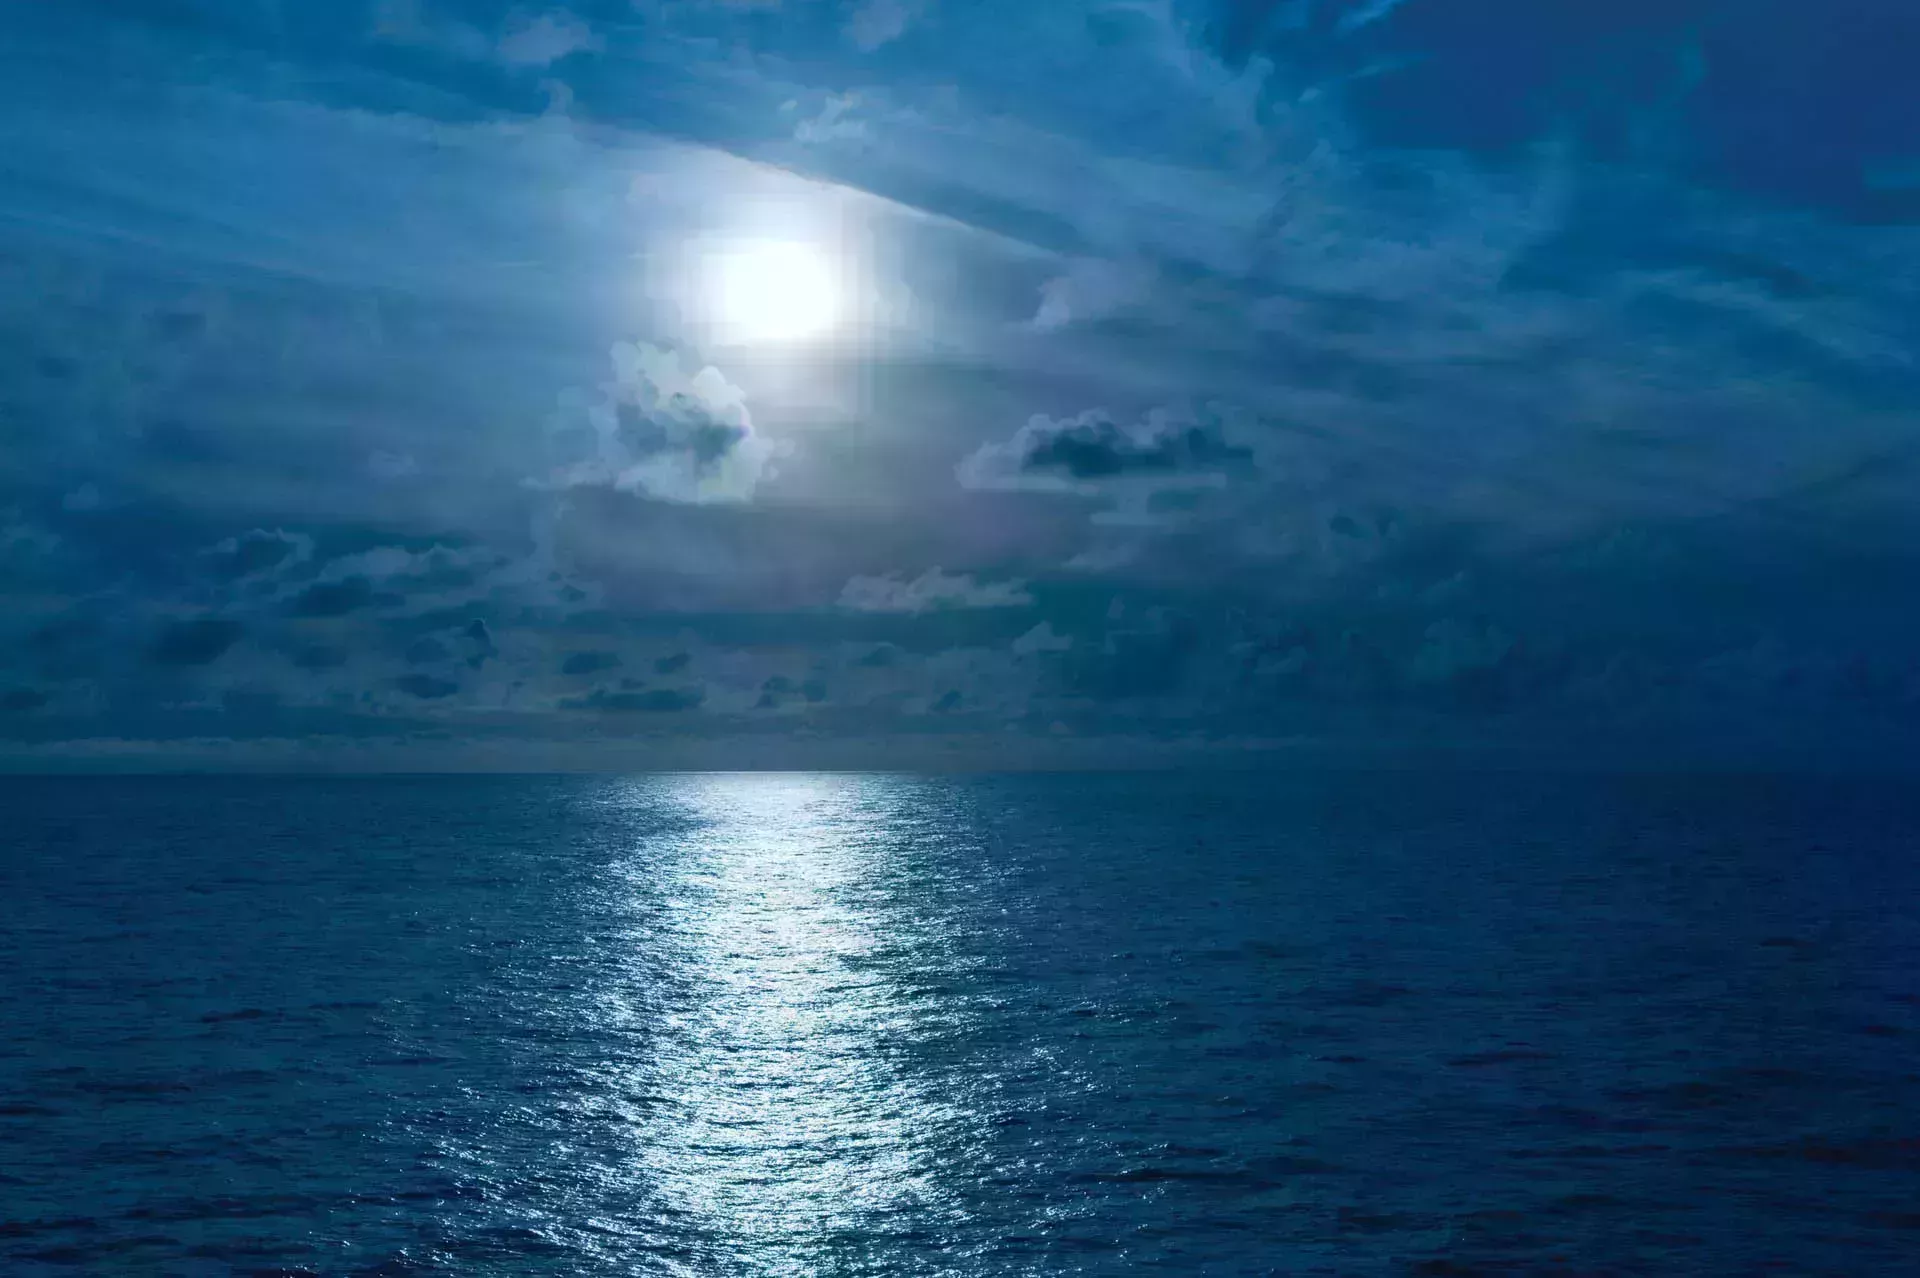 Full moon casting reflection across the ocean's surface